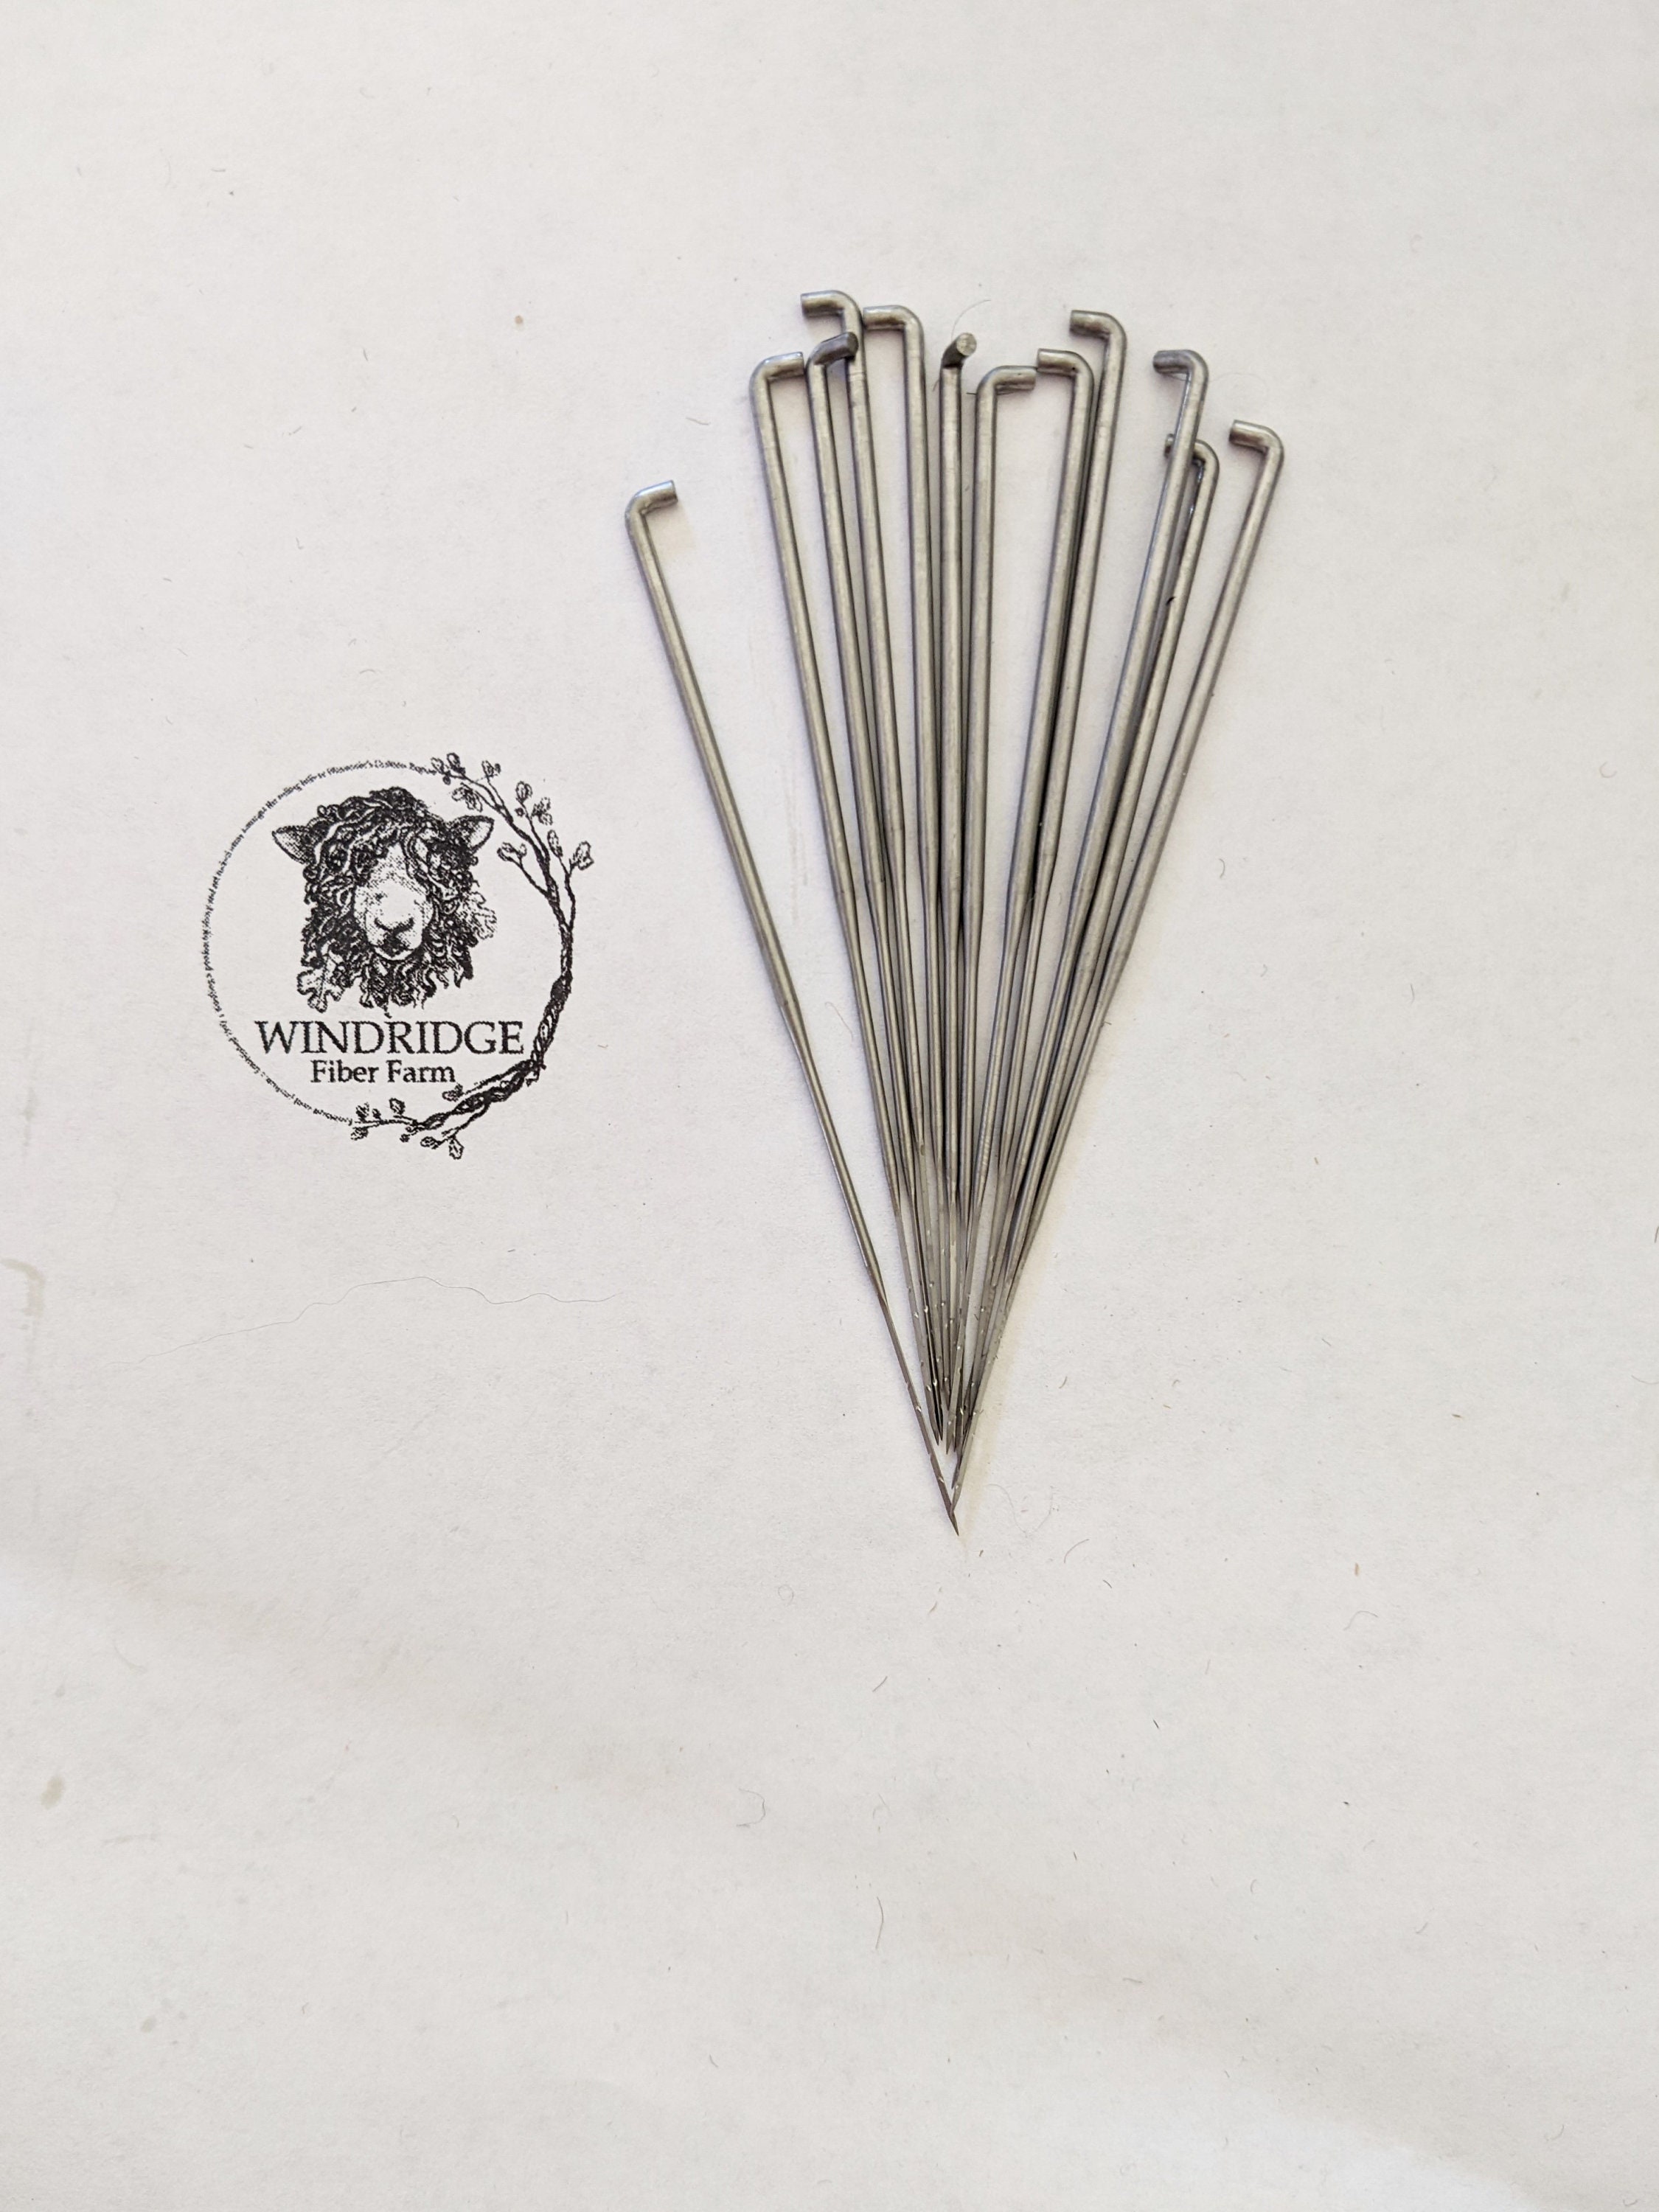 Snag Repair Needles. Repair Snags in Knitted and Woven Garments 2 per  Package. Clover Art No 2512 choose 1 Pack or 2 